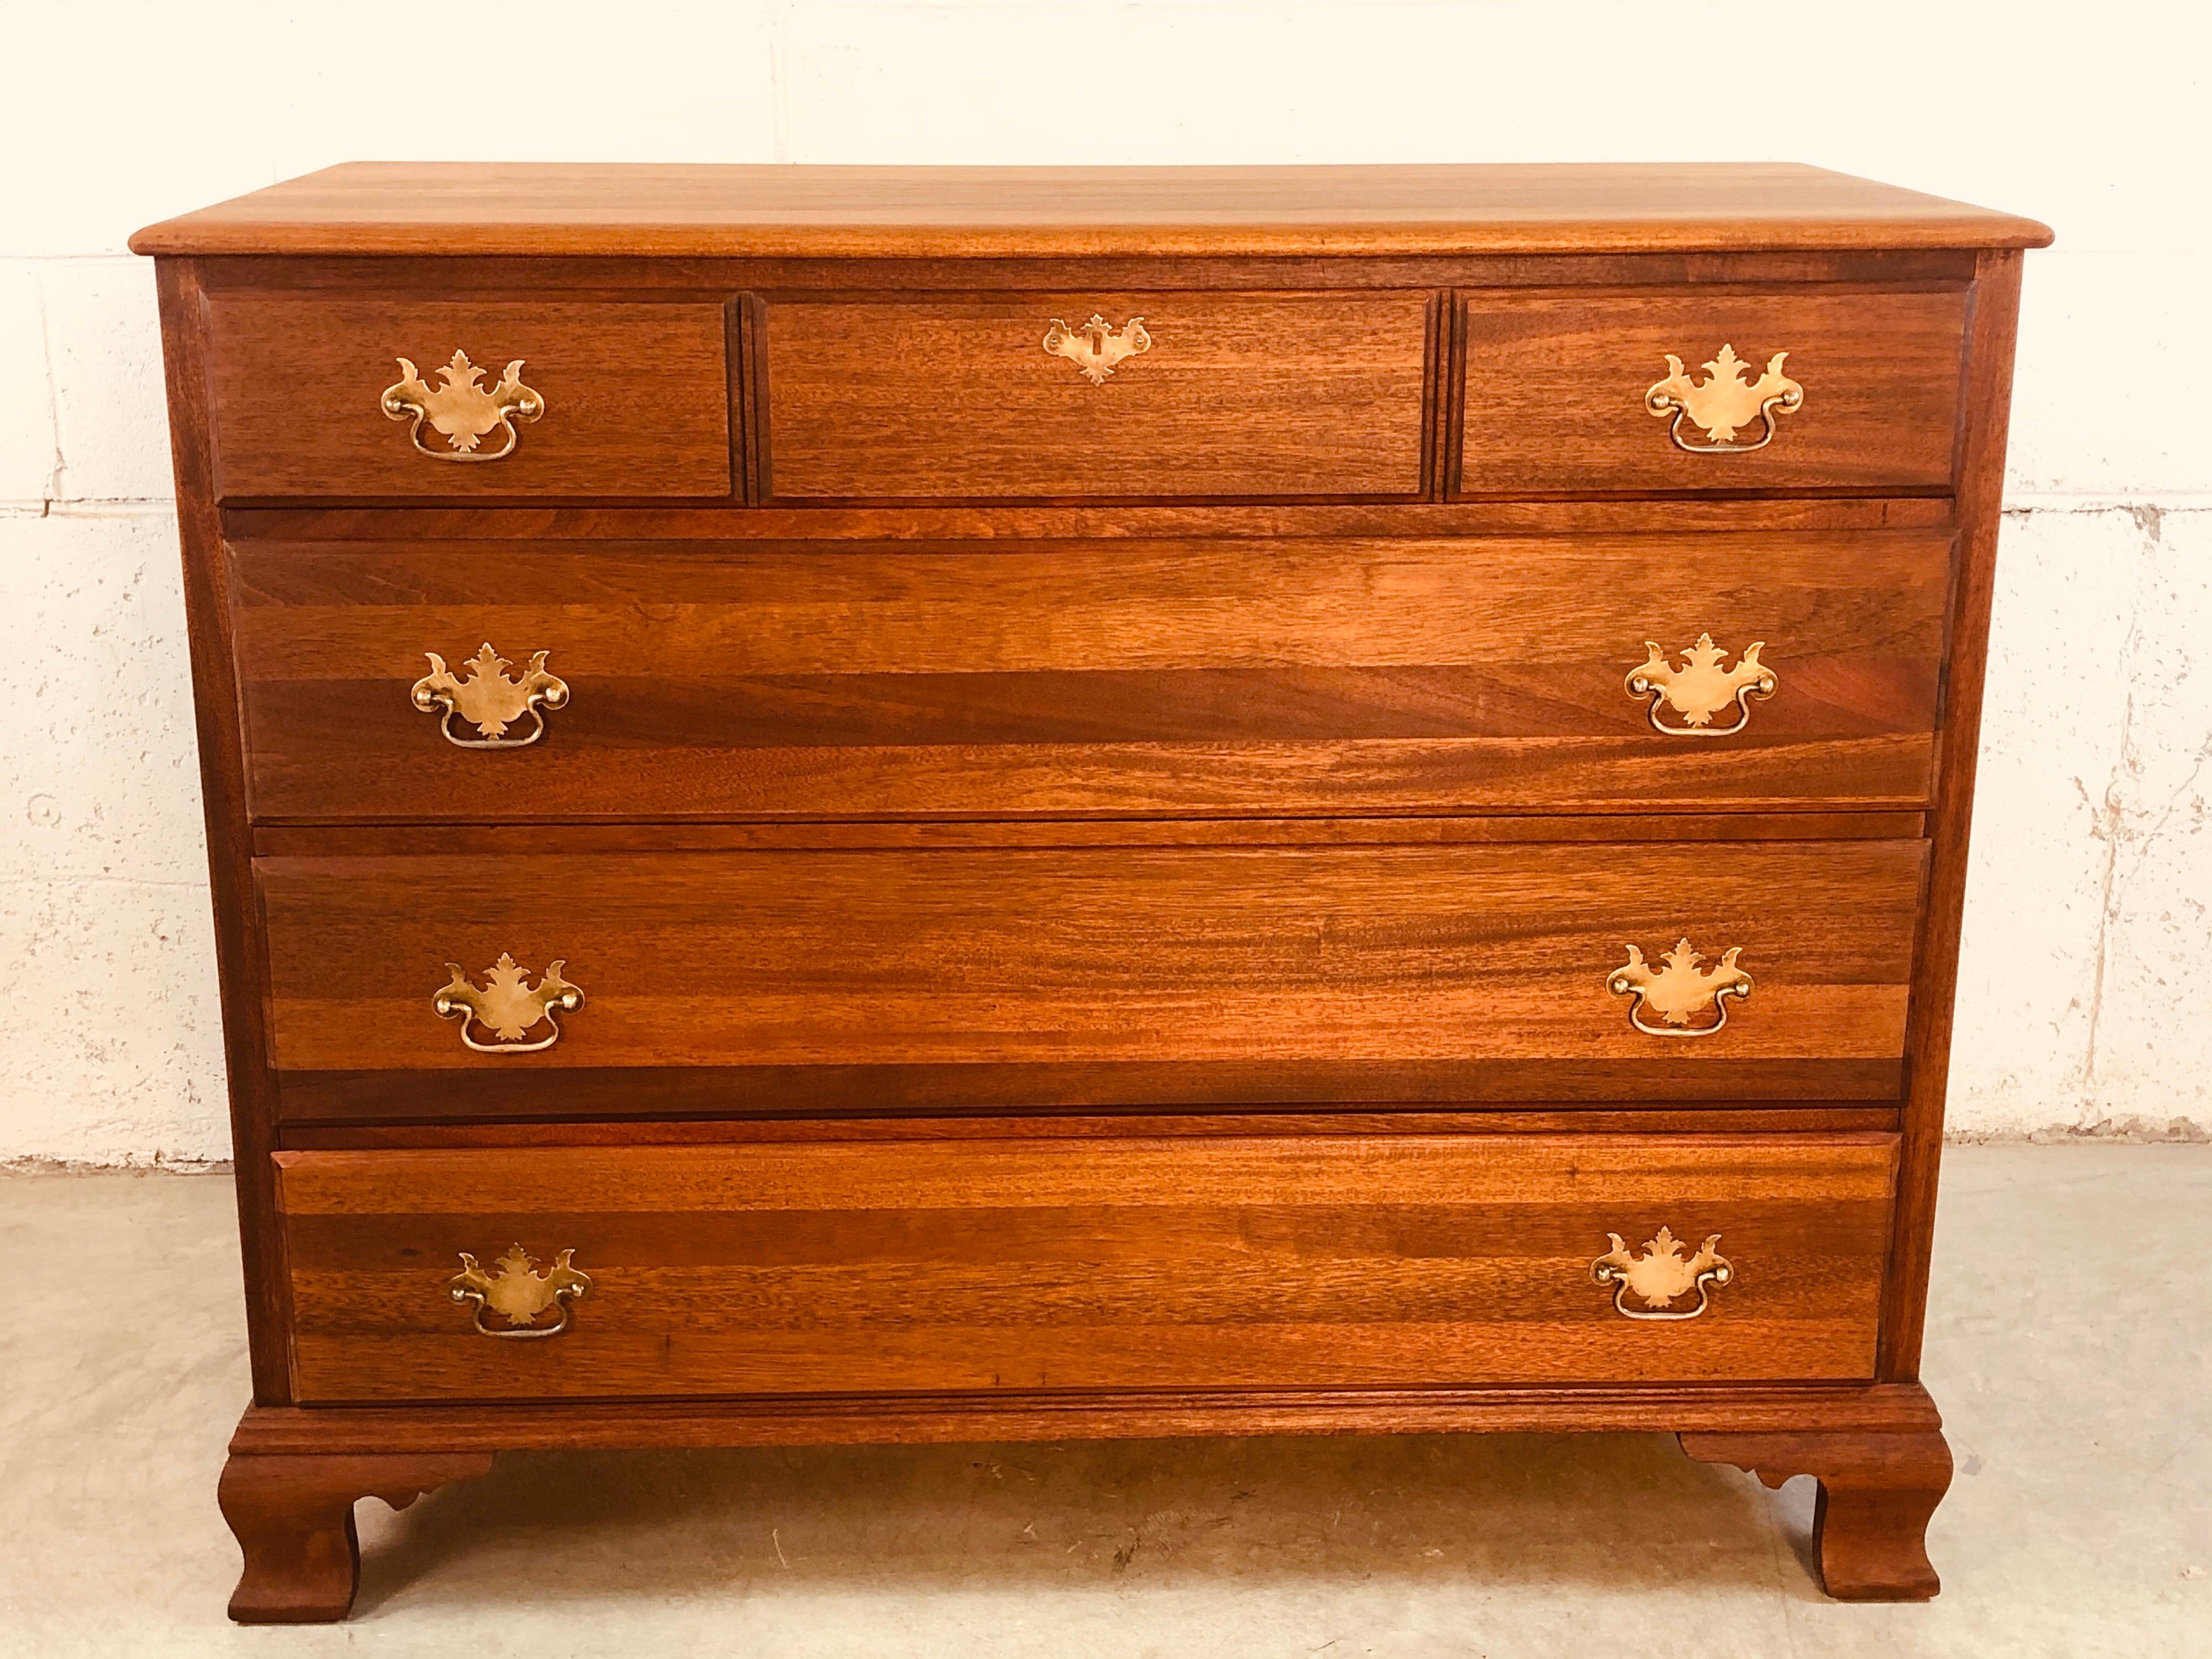 Vintage solid mahogany four-drawer dresser with brass pulls. The dresser is newly refinished and has lots of storage. Marked in the drawer and dated 1947 on the back. The dresser is in excellent condition.